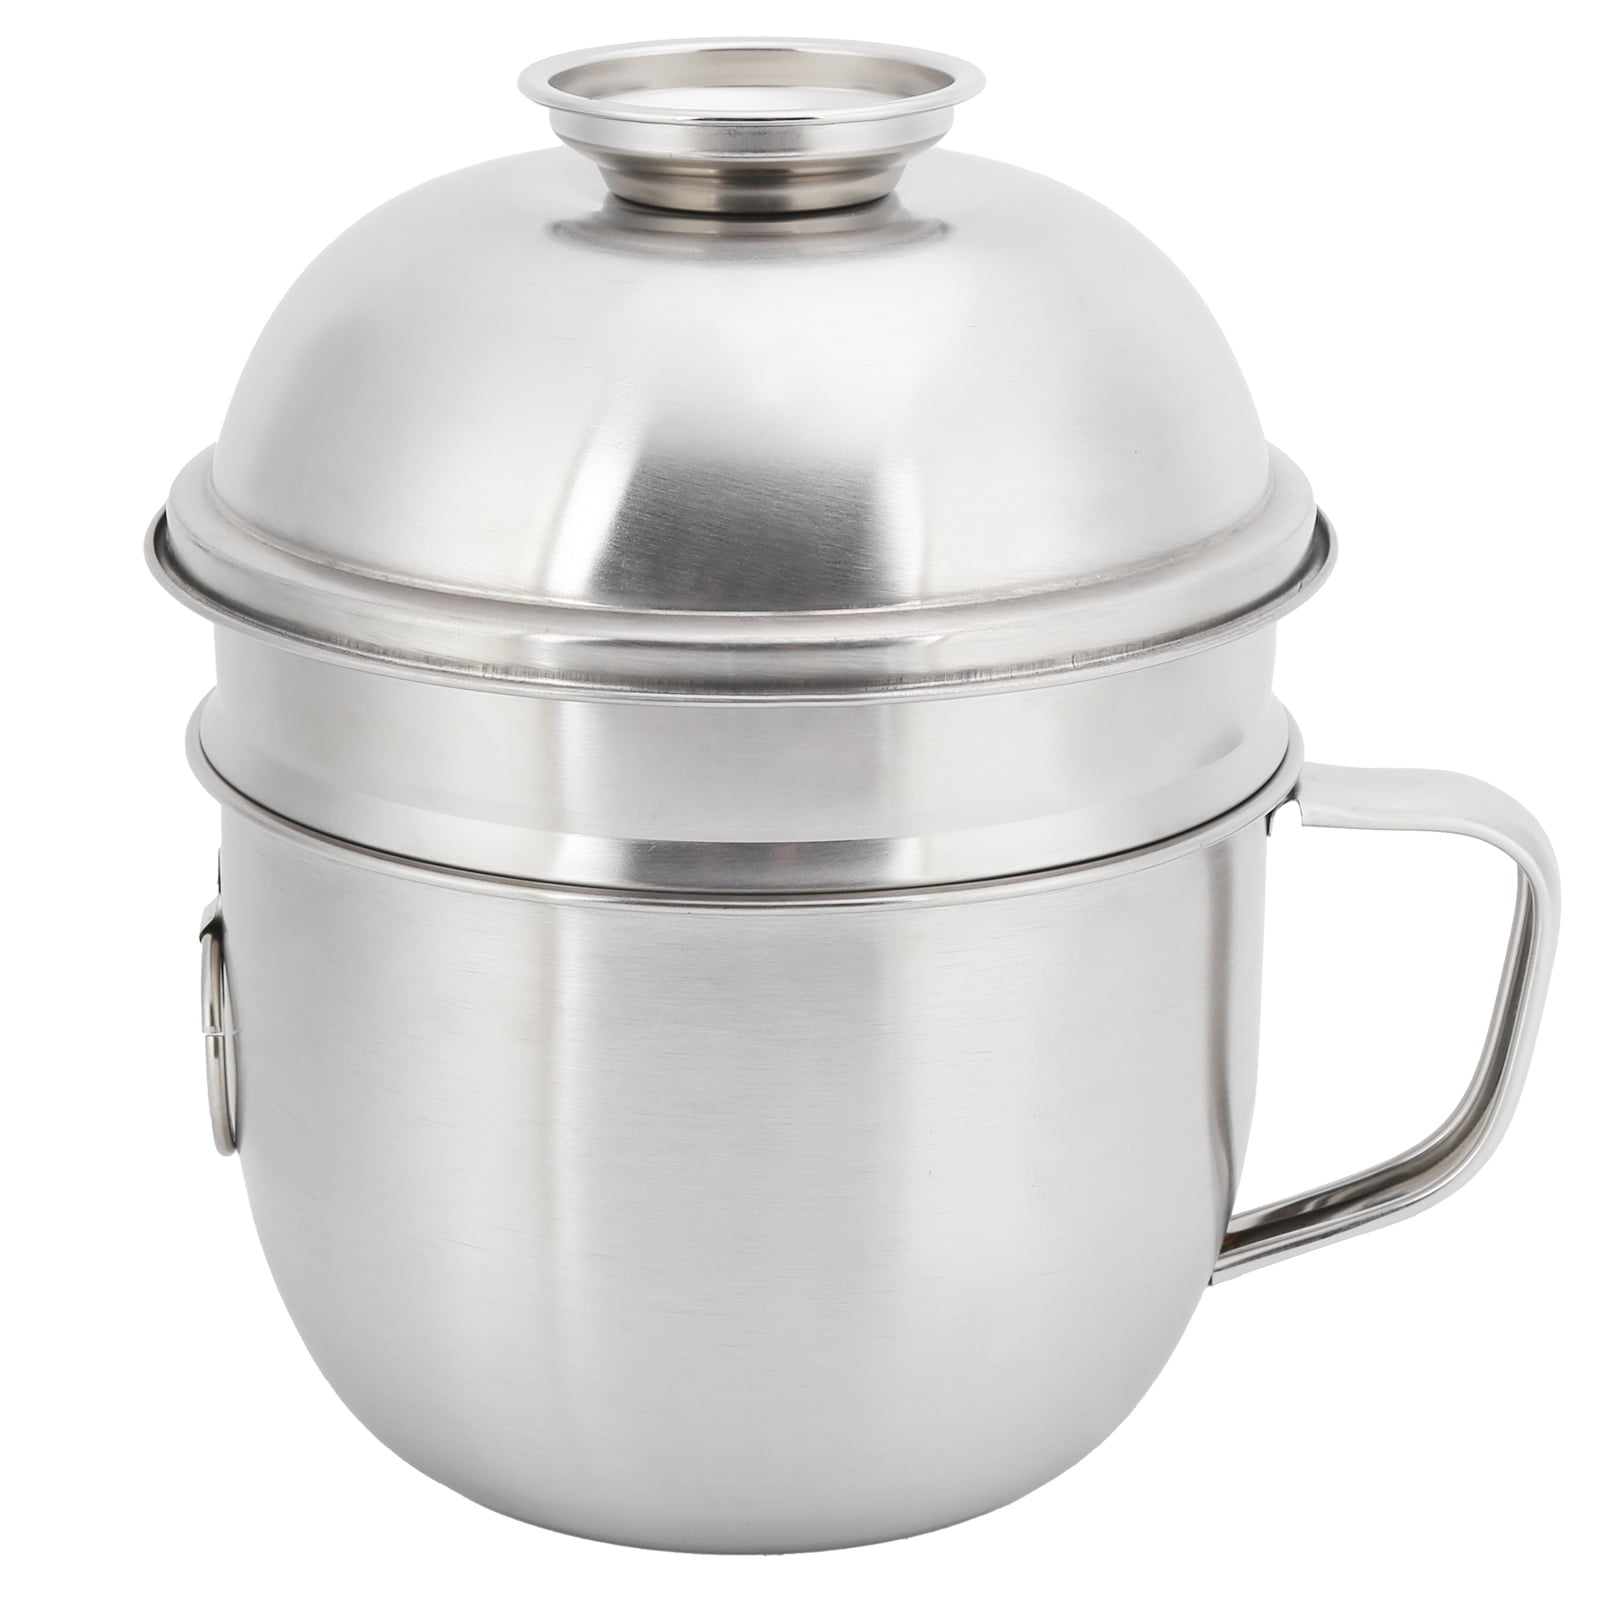 Pinnacle Thermoware 3.6-Qt Stainless Steel Bowl Insulated Food